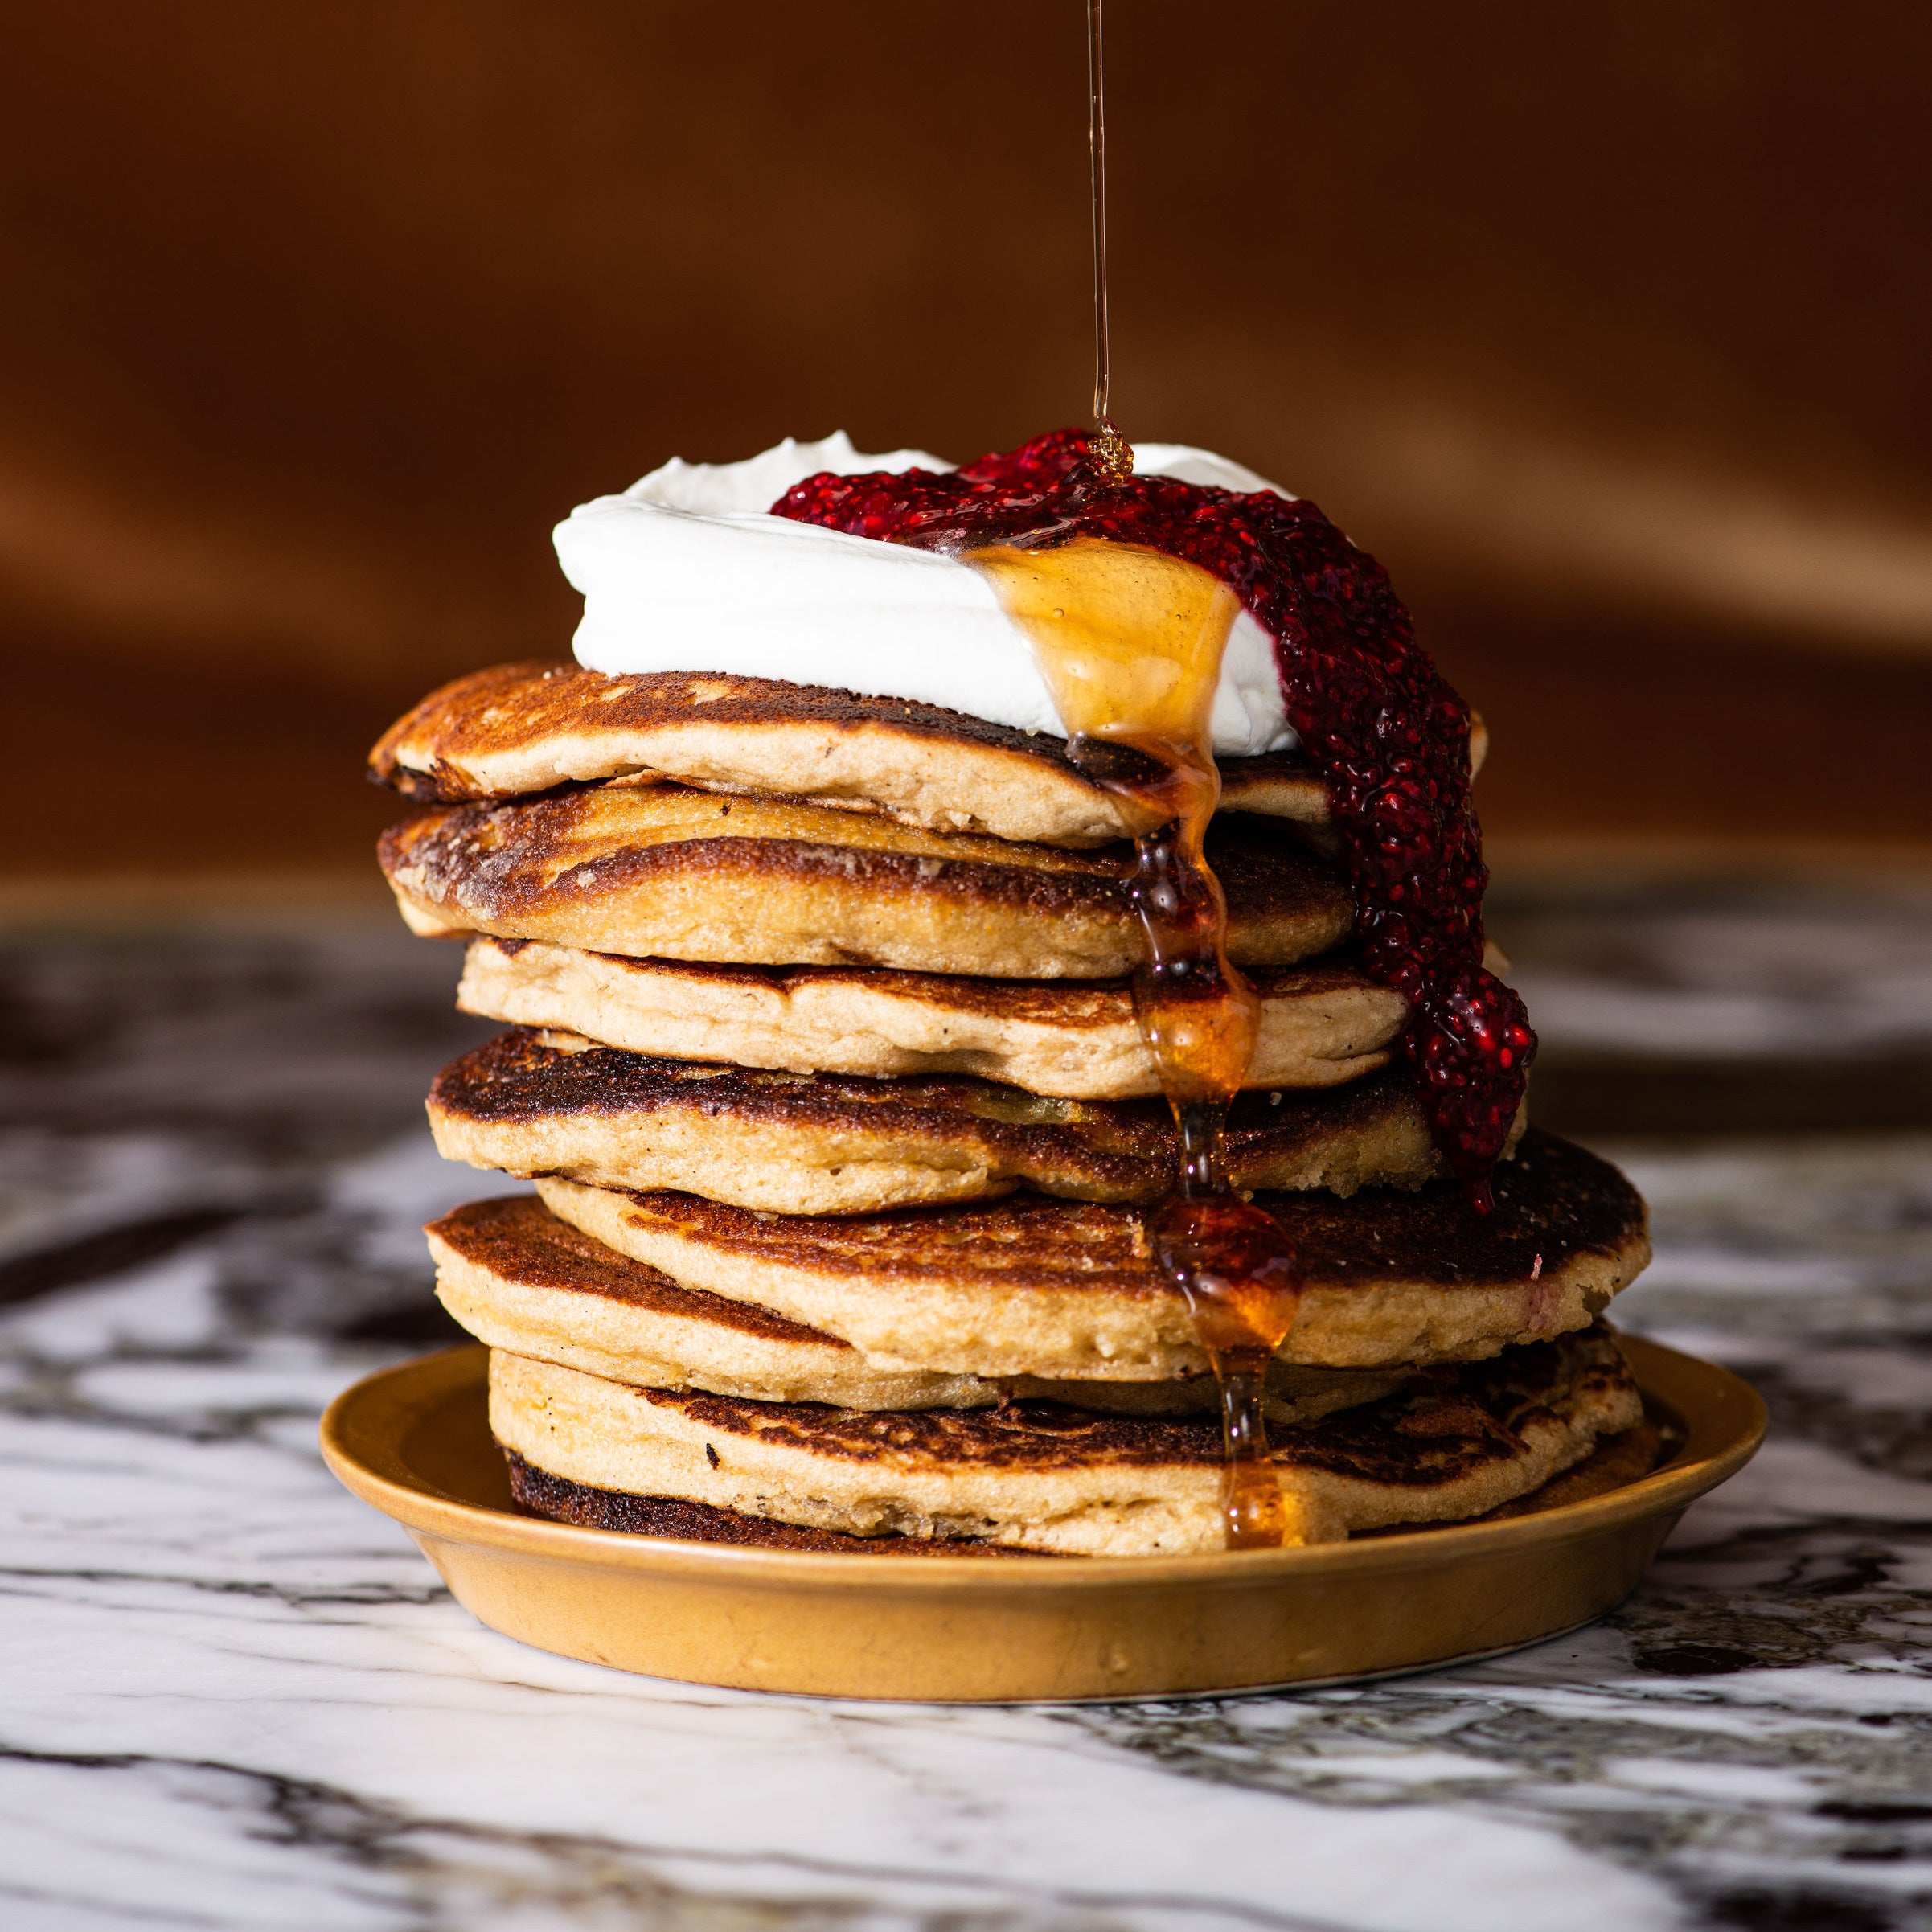 Whole Wheat Pancakes - so delicious and made with 100% Whole Wheat Flour